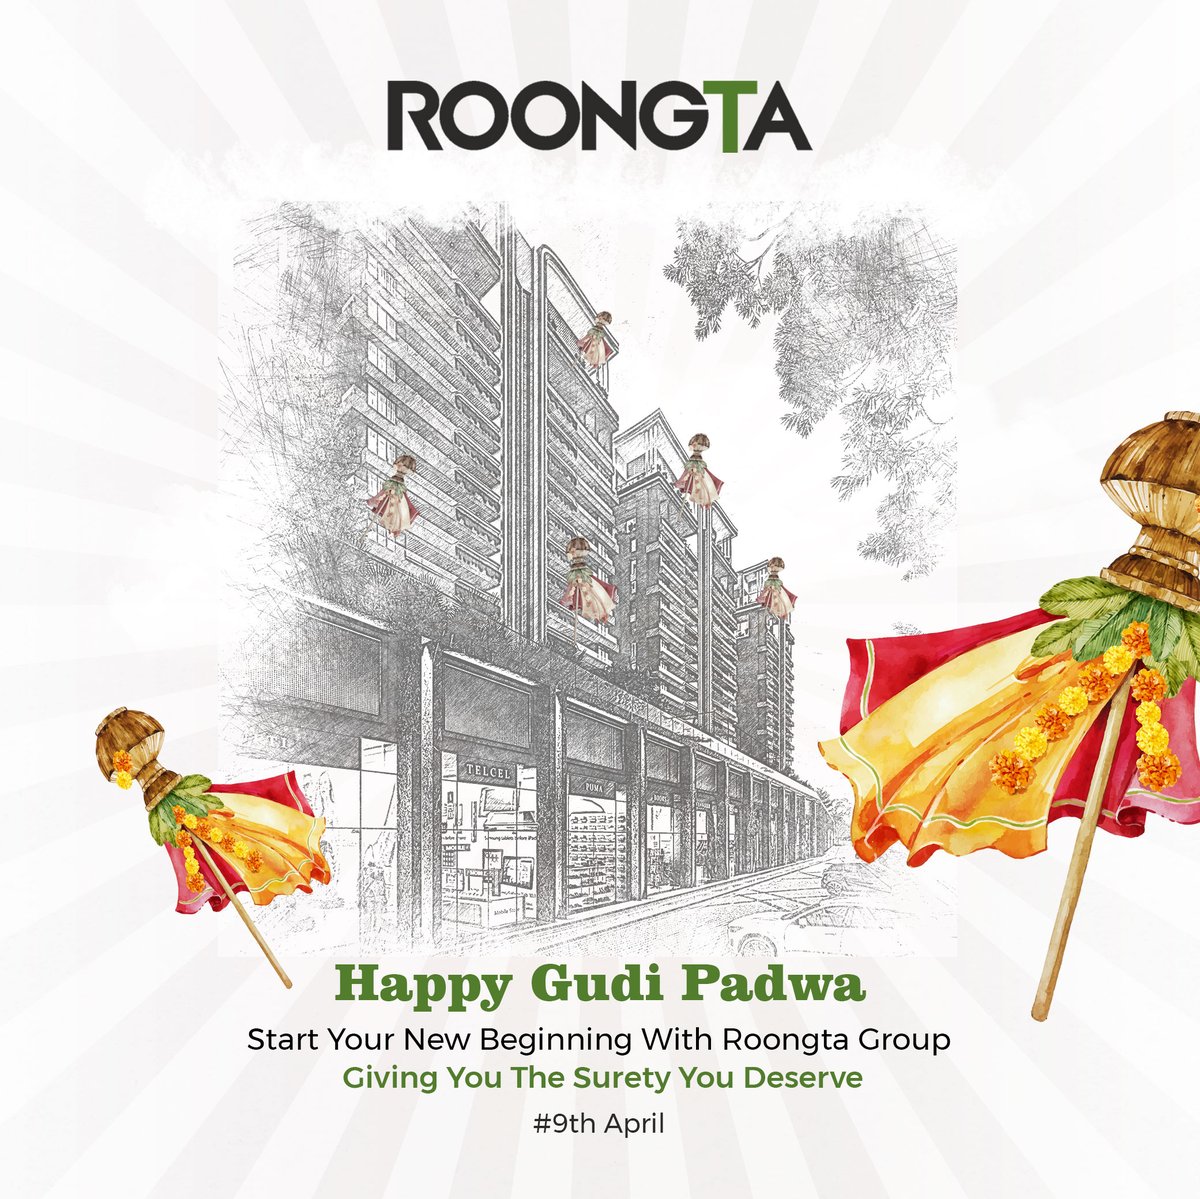 May this Gudi Padwa bring you prosperity and joy.

At Roongta, we're committed to being with you every step of the way.
.
.
.
.
.
.
.
.
#RoongtaGroup #GudiPadwa #NewBeginnings #roongtadeveloper #Prosperity #SuretyYouDeserve #FestiveGreetings #RealEstateJoy #webuildtomorrow